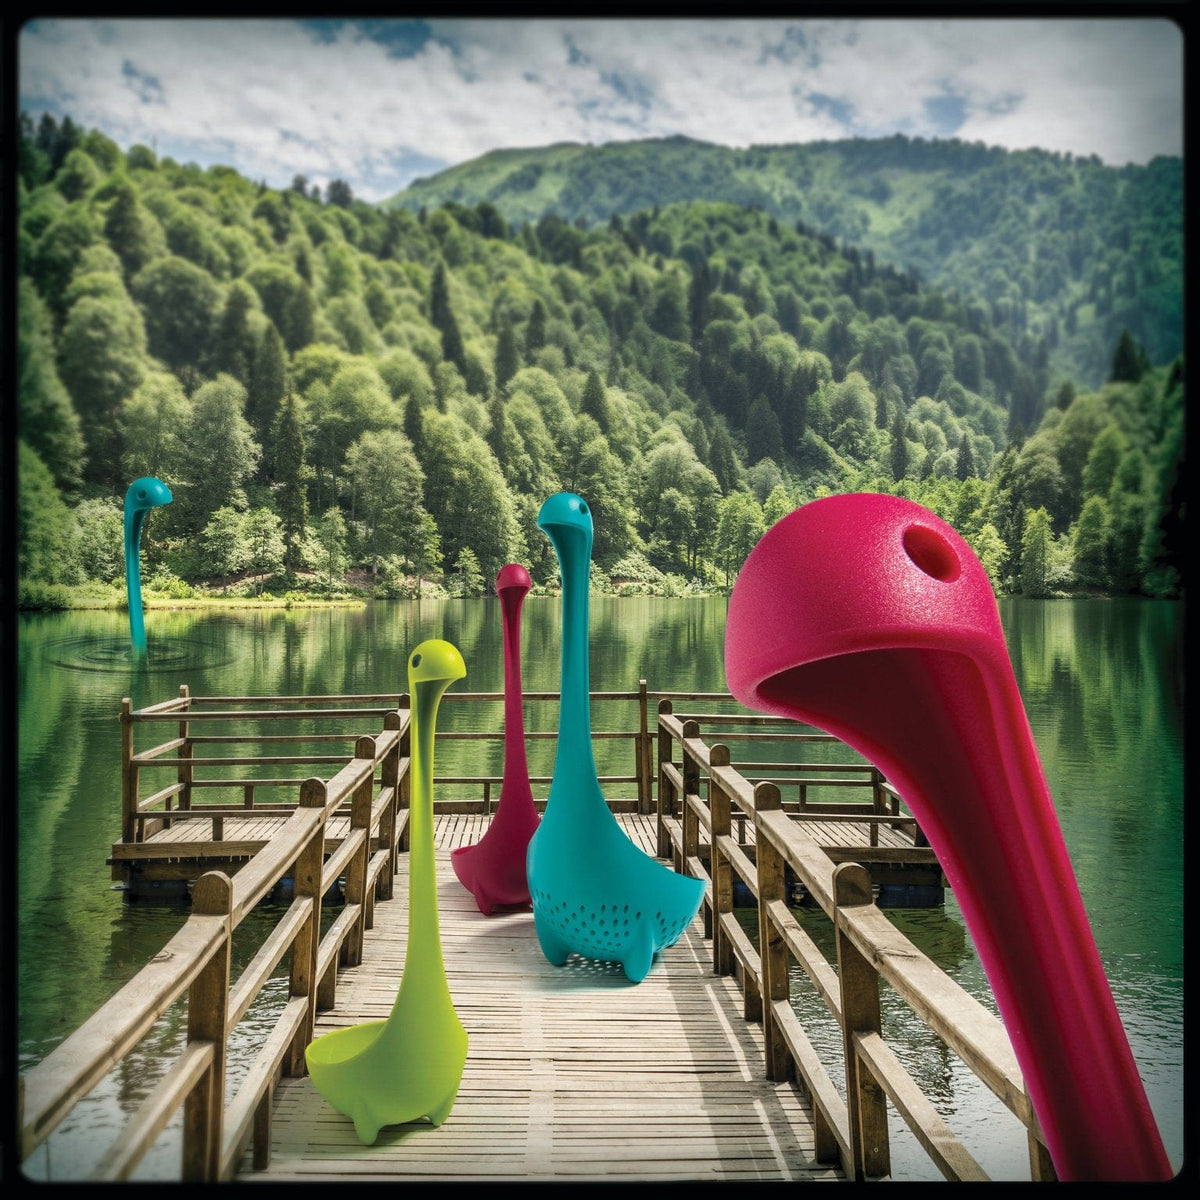 https://www.quirksy.shop/wp-content/uploads/1691/29/we-are-proud-of-giving-each-customer-in-our-store-as-if-they-are-family-members-helping-customers-locate-the-nessie-family-ladle-pack-ototo-is-what-we-do_5.jpg